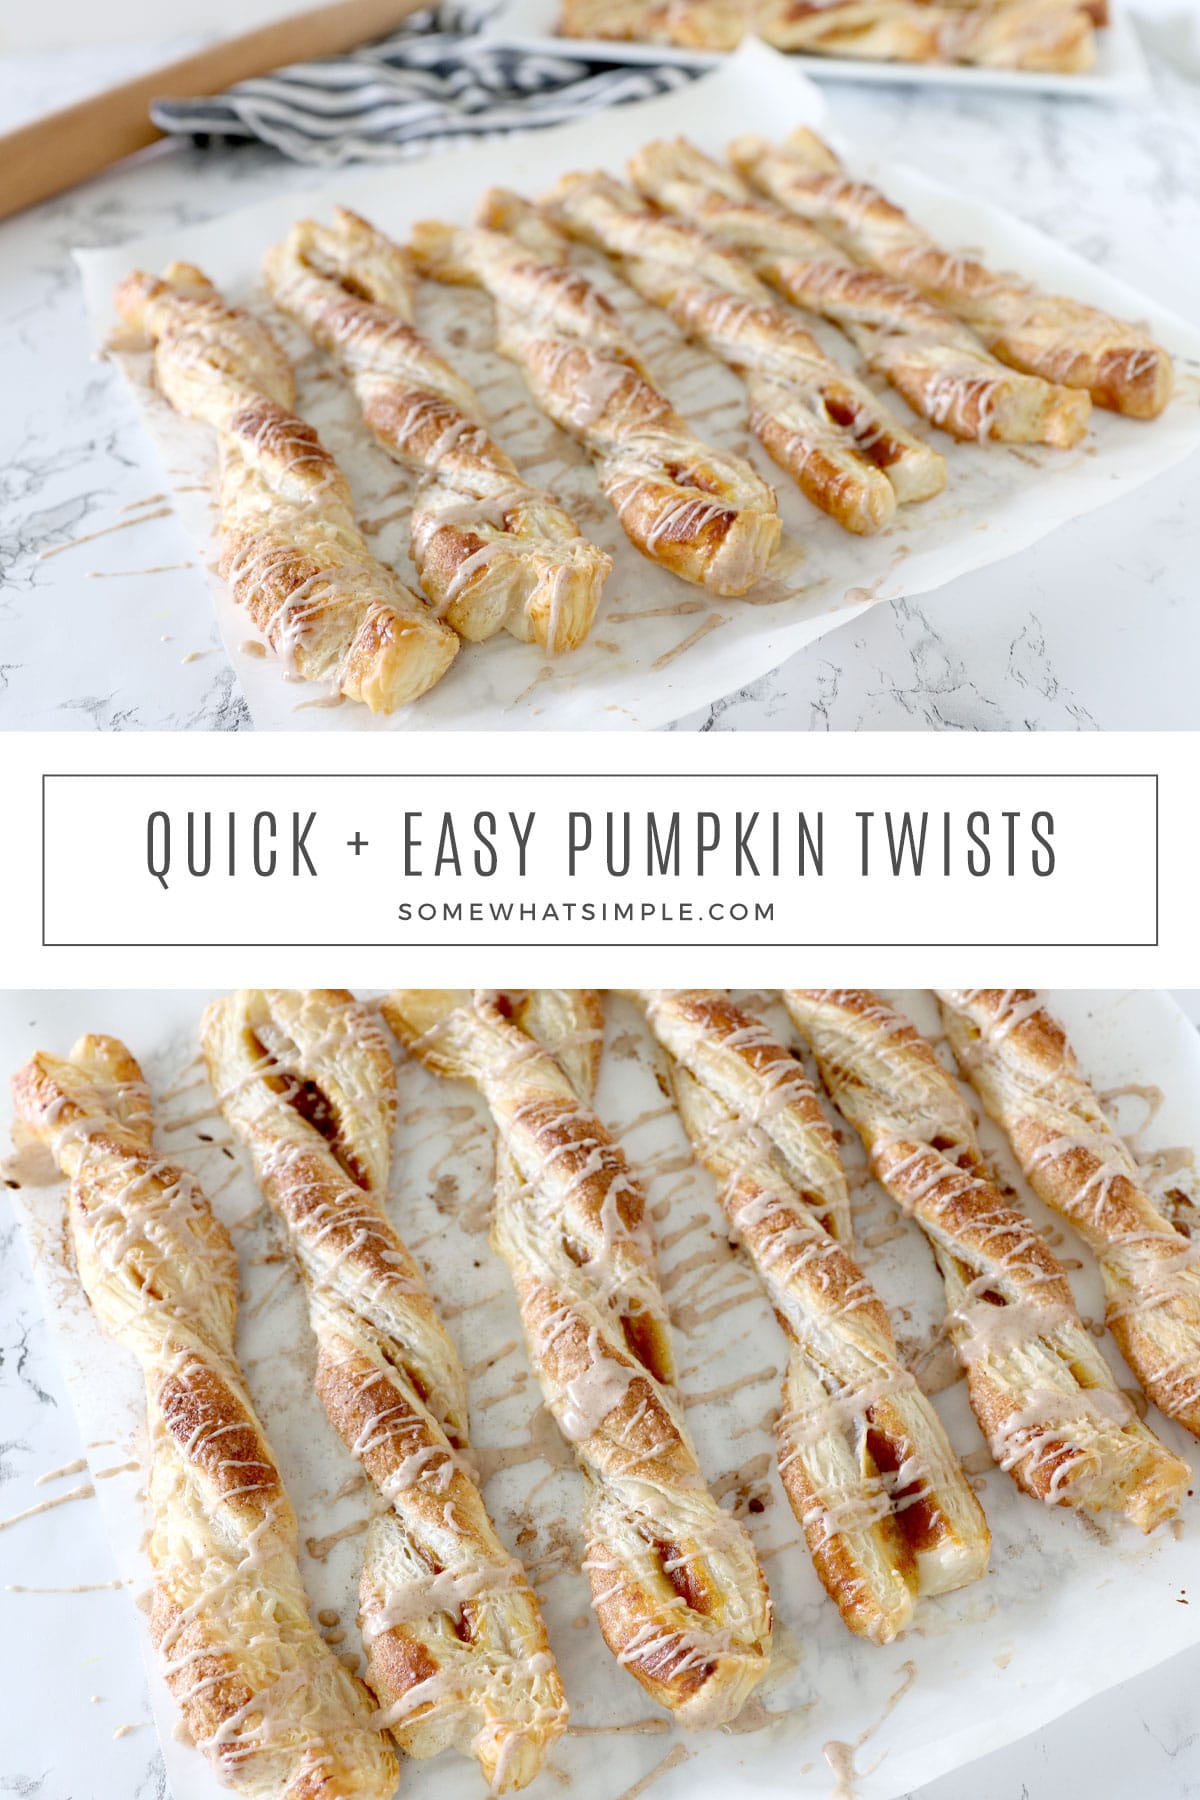 Pumpkin Twists are a delicious finger food with all the flavors you love in a pumpkin pie! They're simple to make and totally delicious! via @somewhatsimple